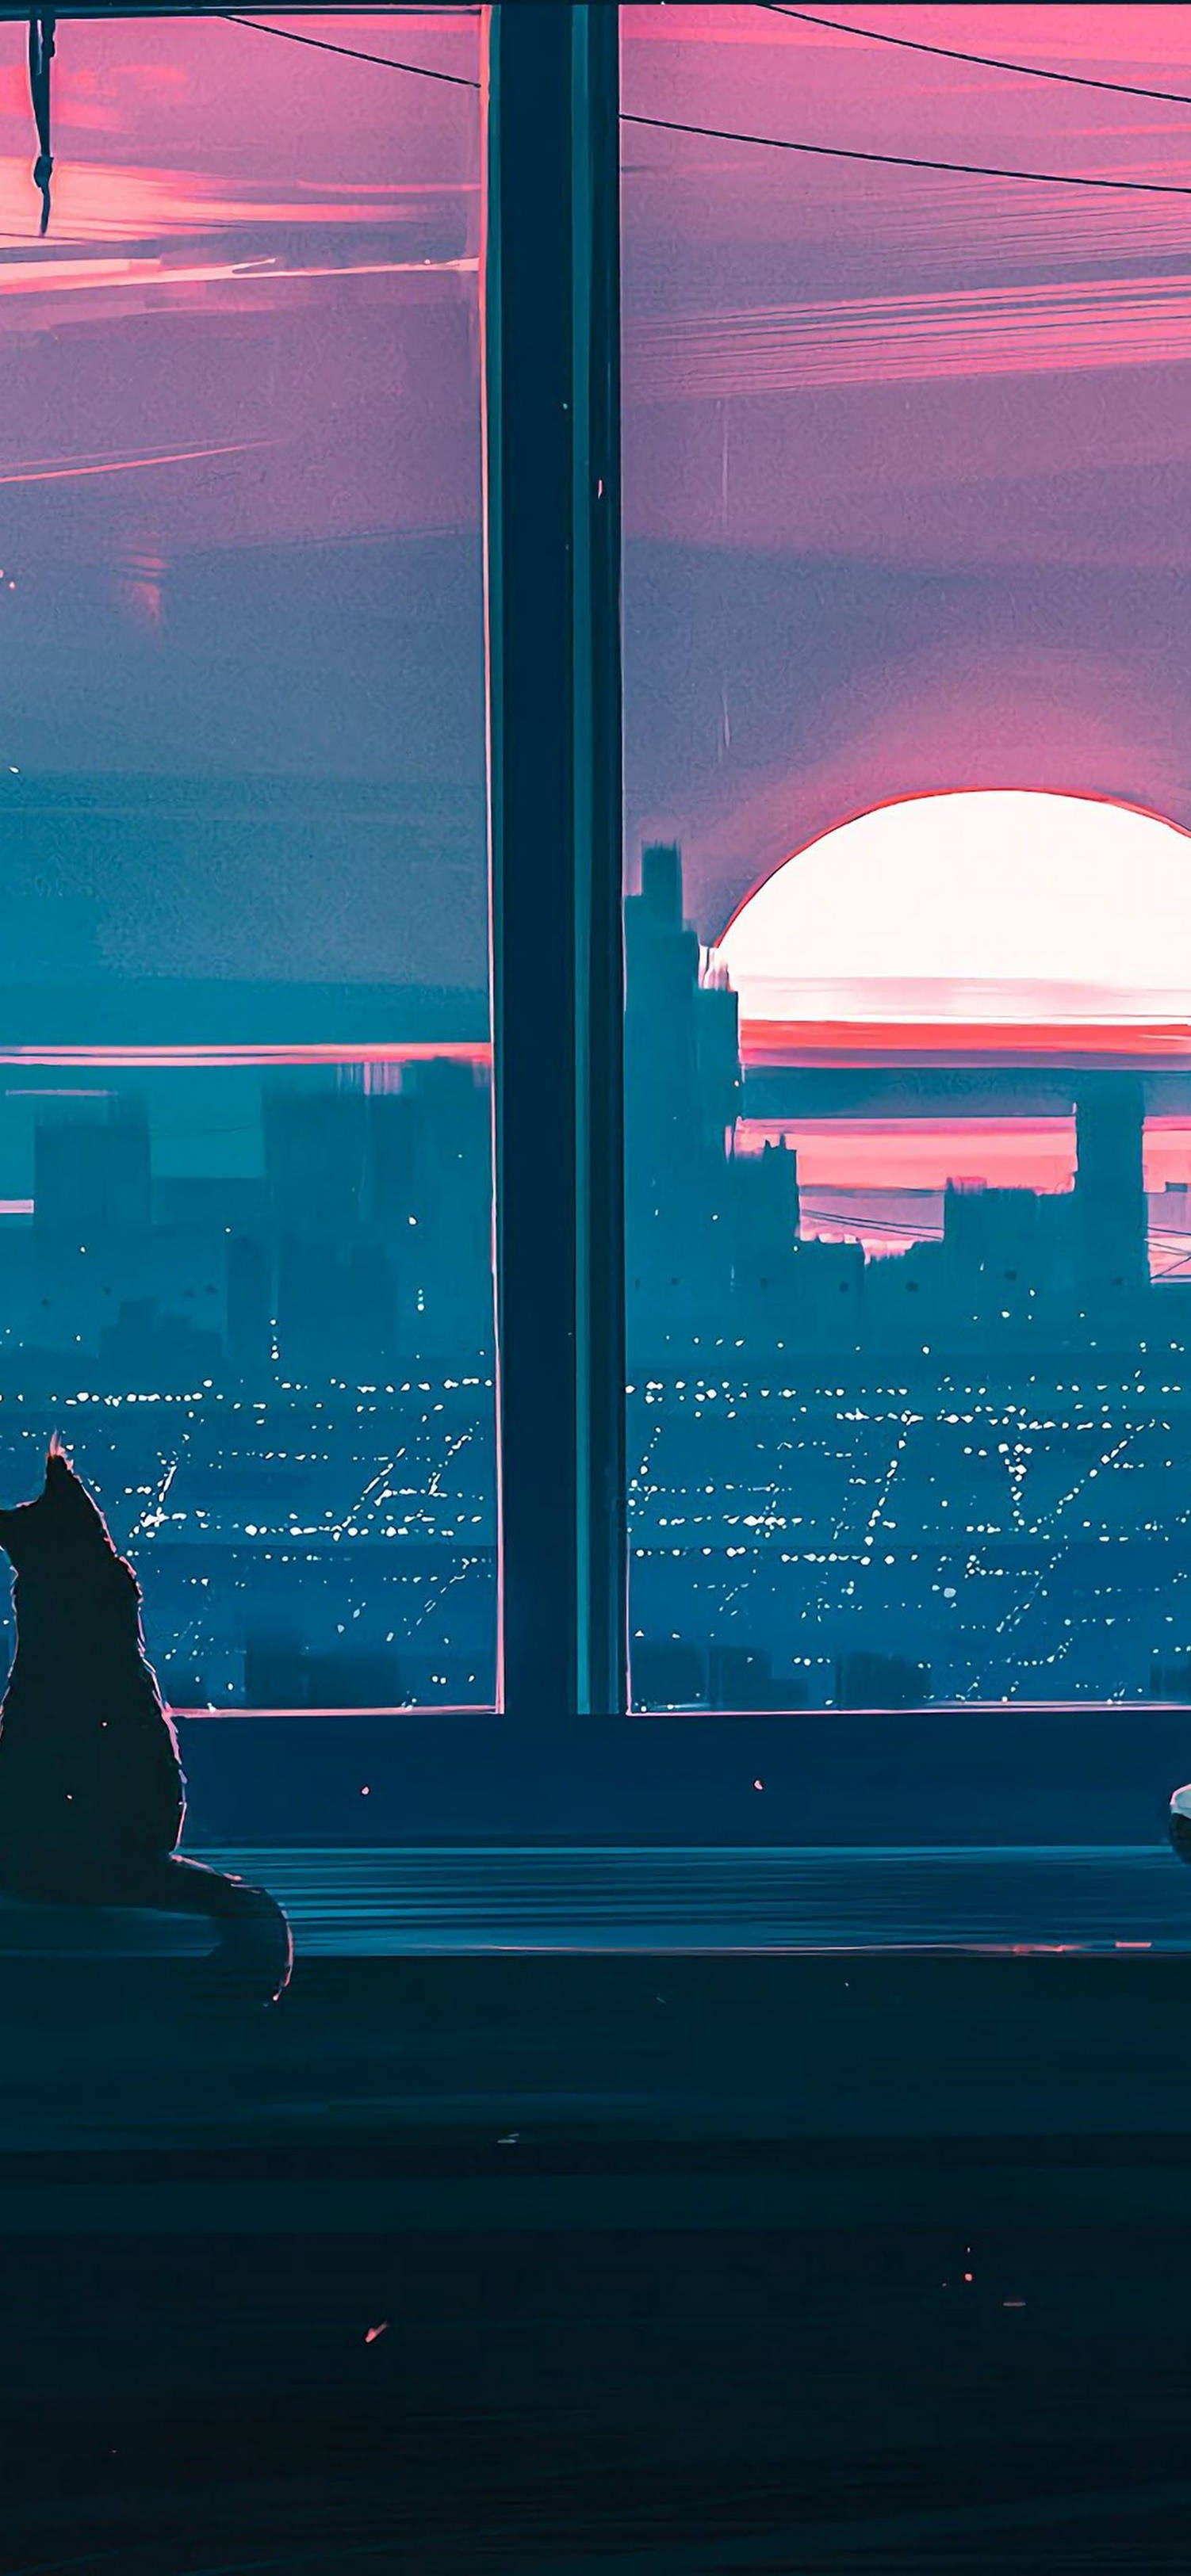 Entrancing Sunset Anime Aesthetics for iPhone - A Cat by The Window Wallpaper